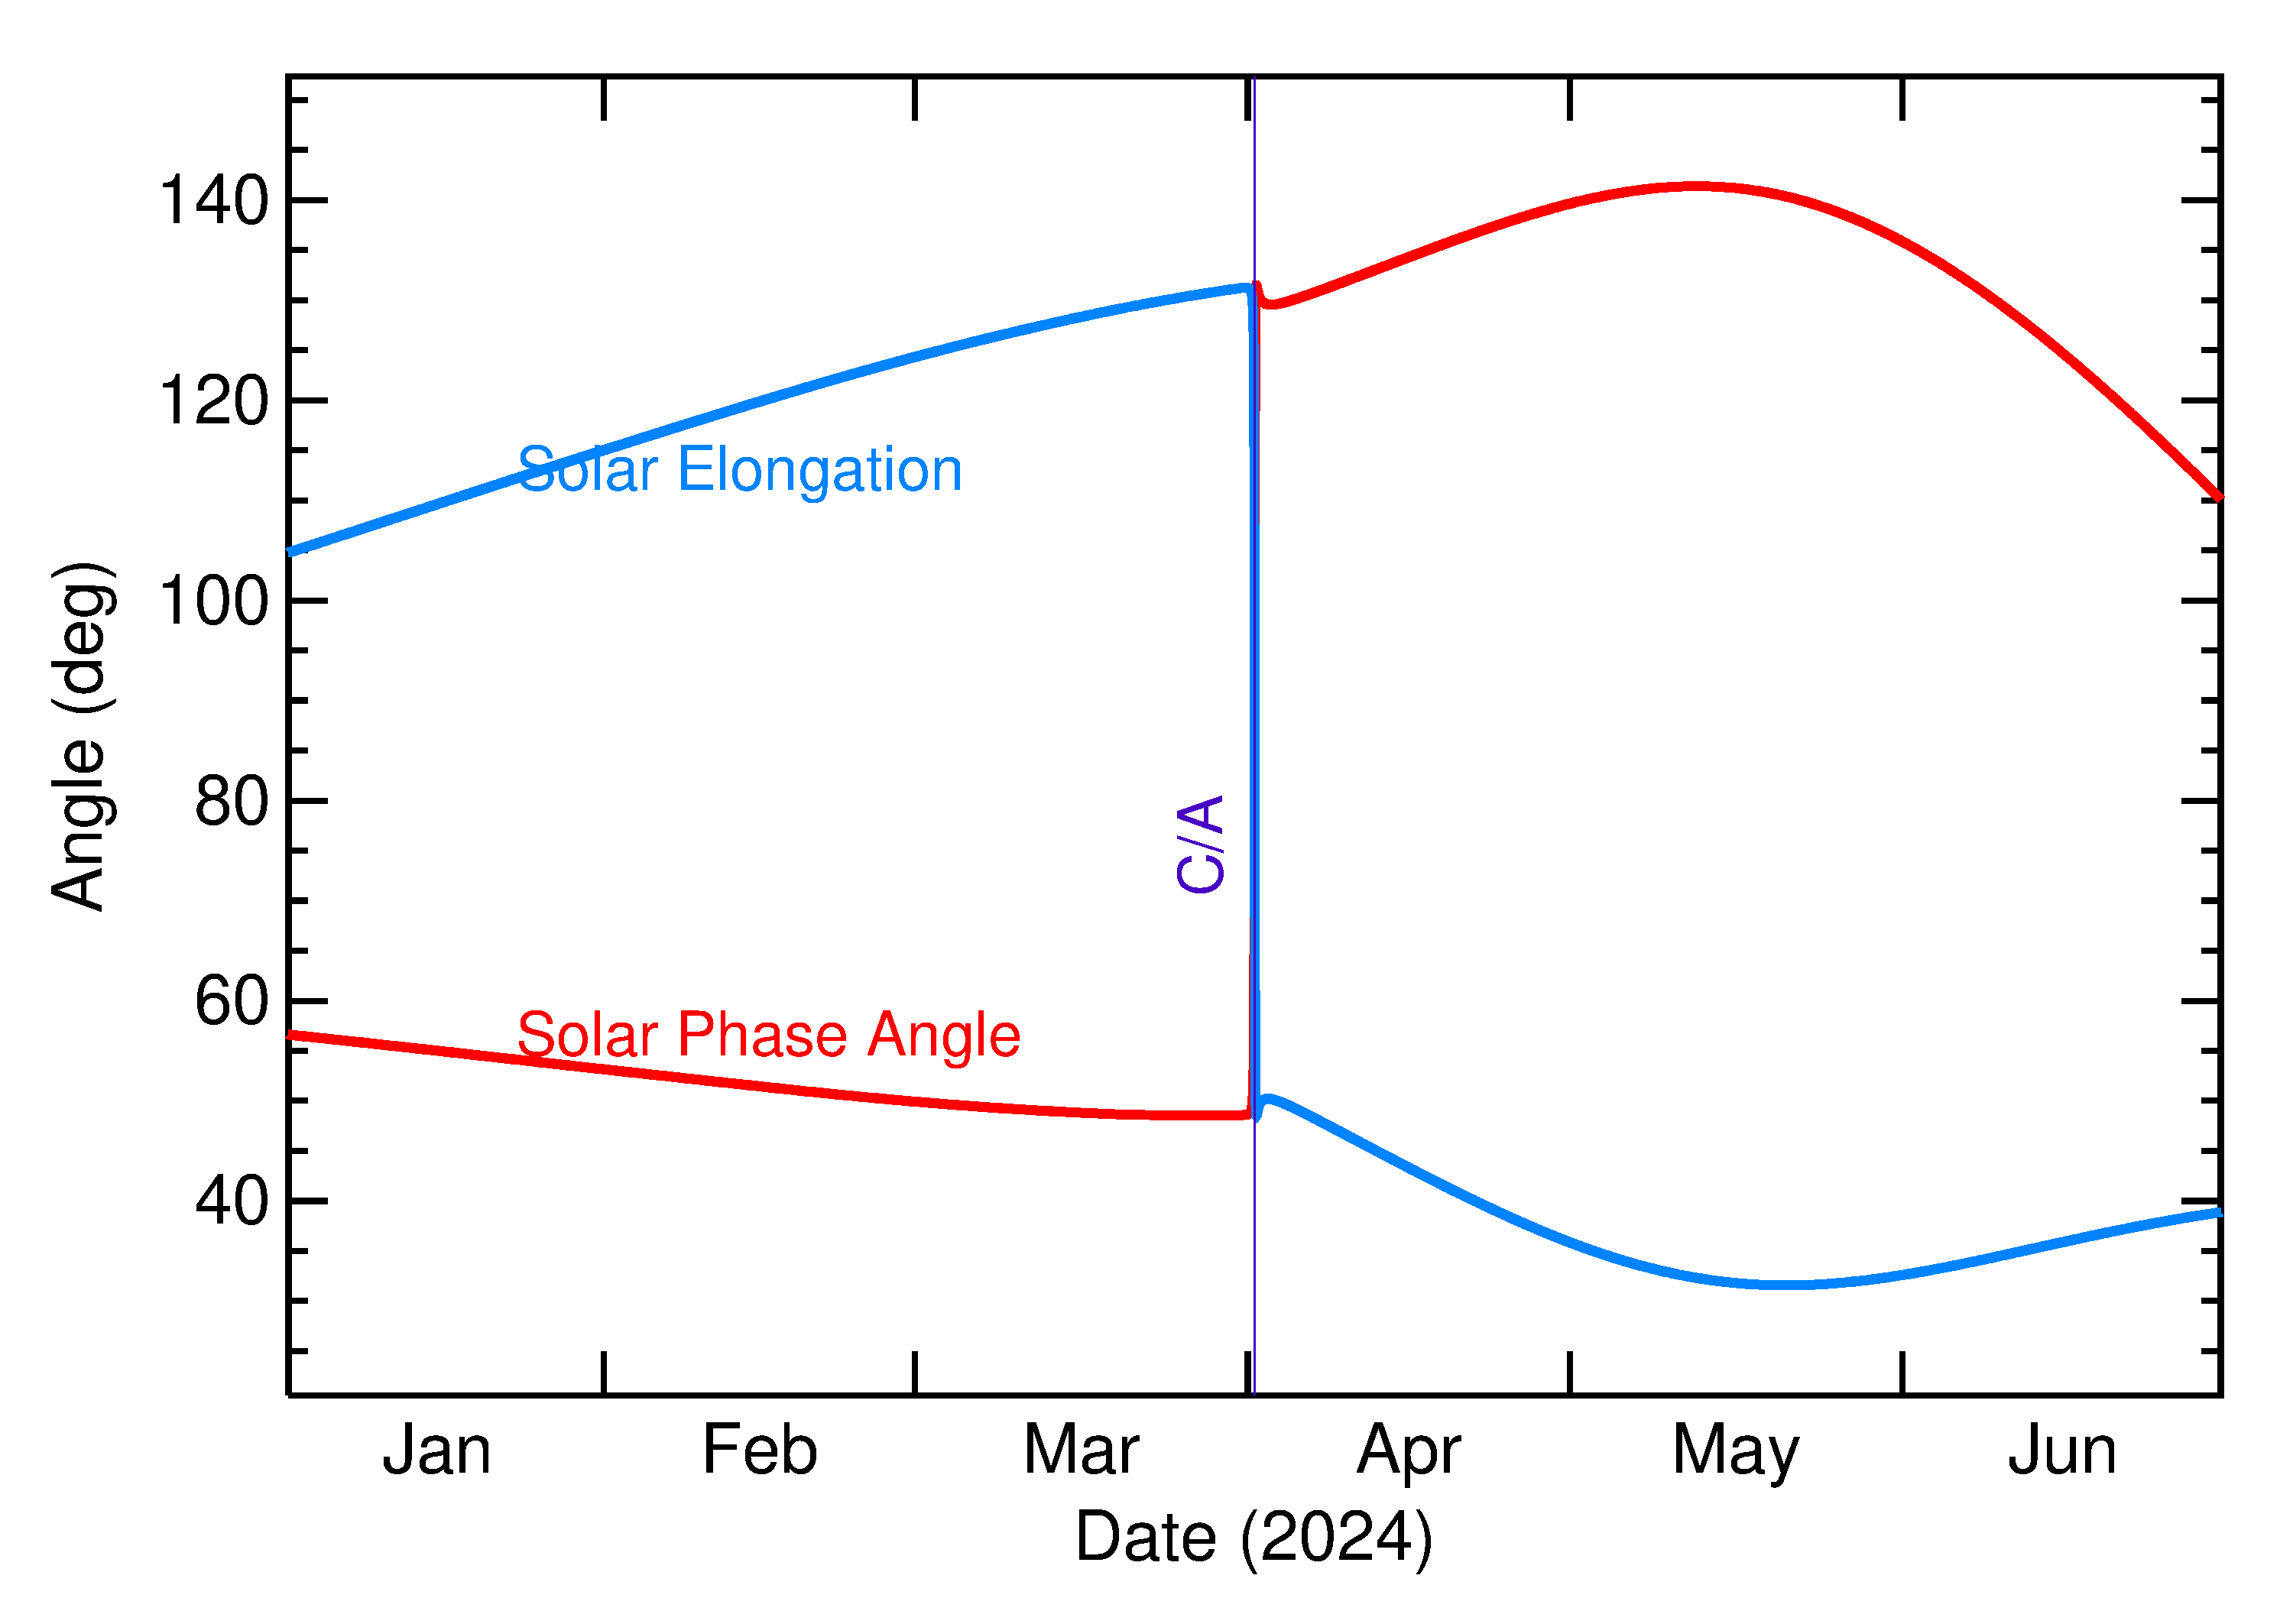 Solar Elongation and Solar Phase Angle of 2024 FQ5 in the months around closest approach